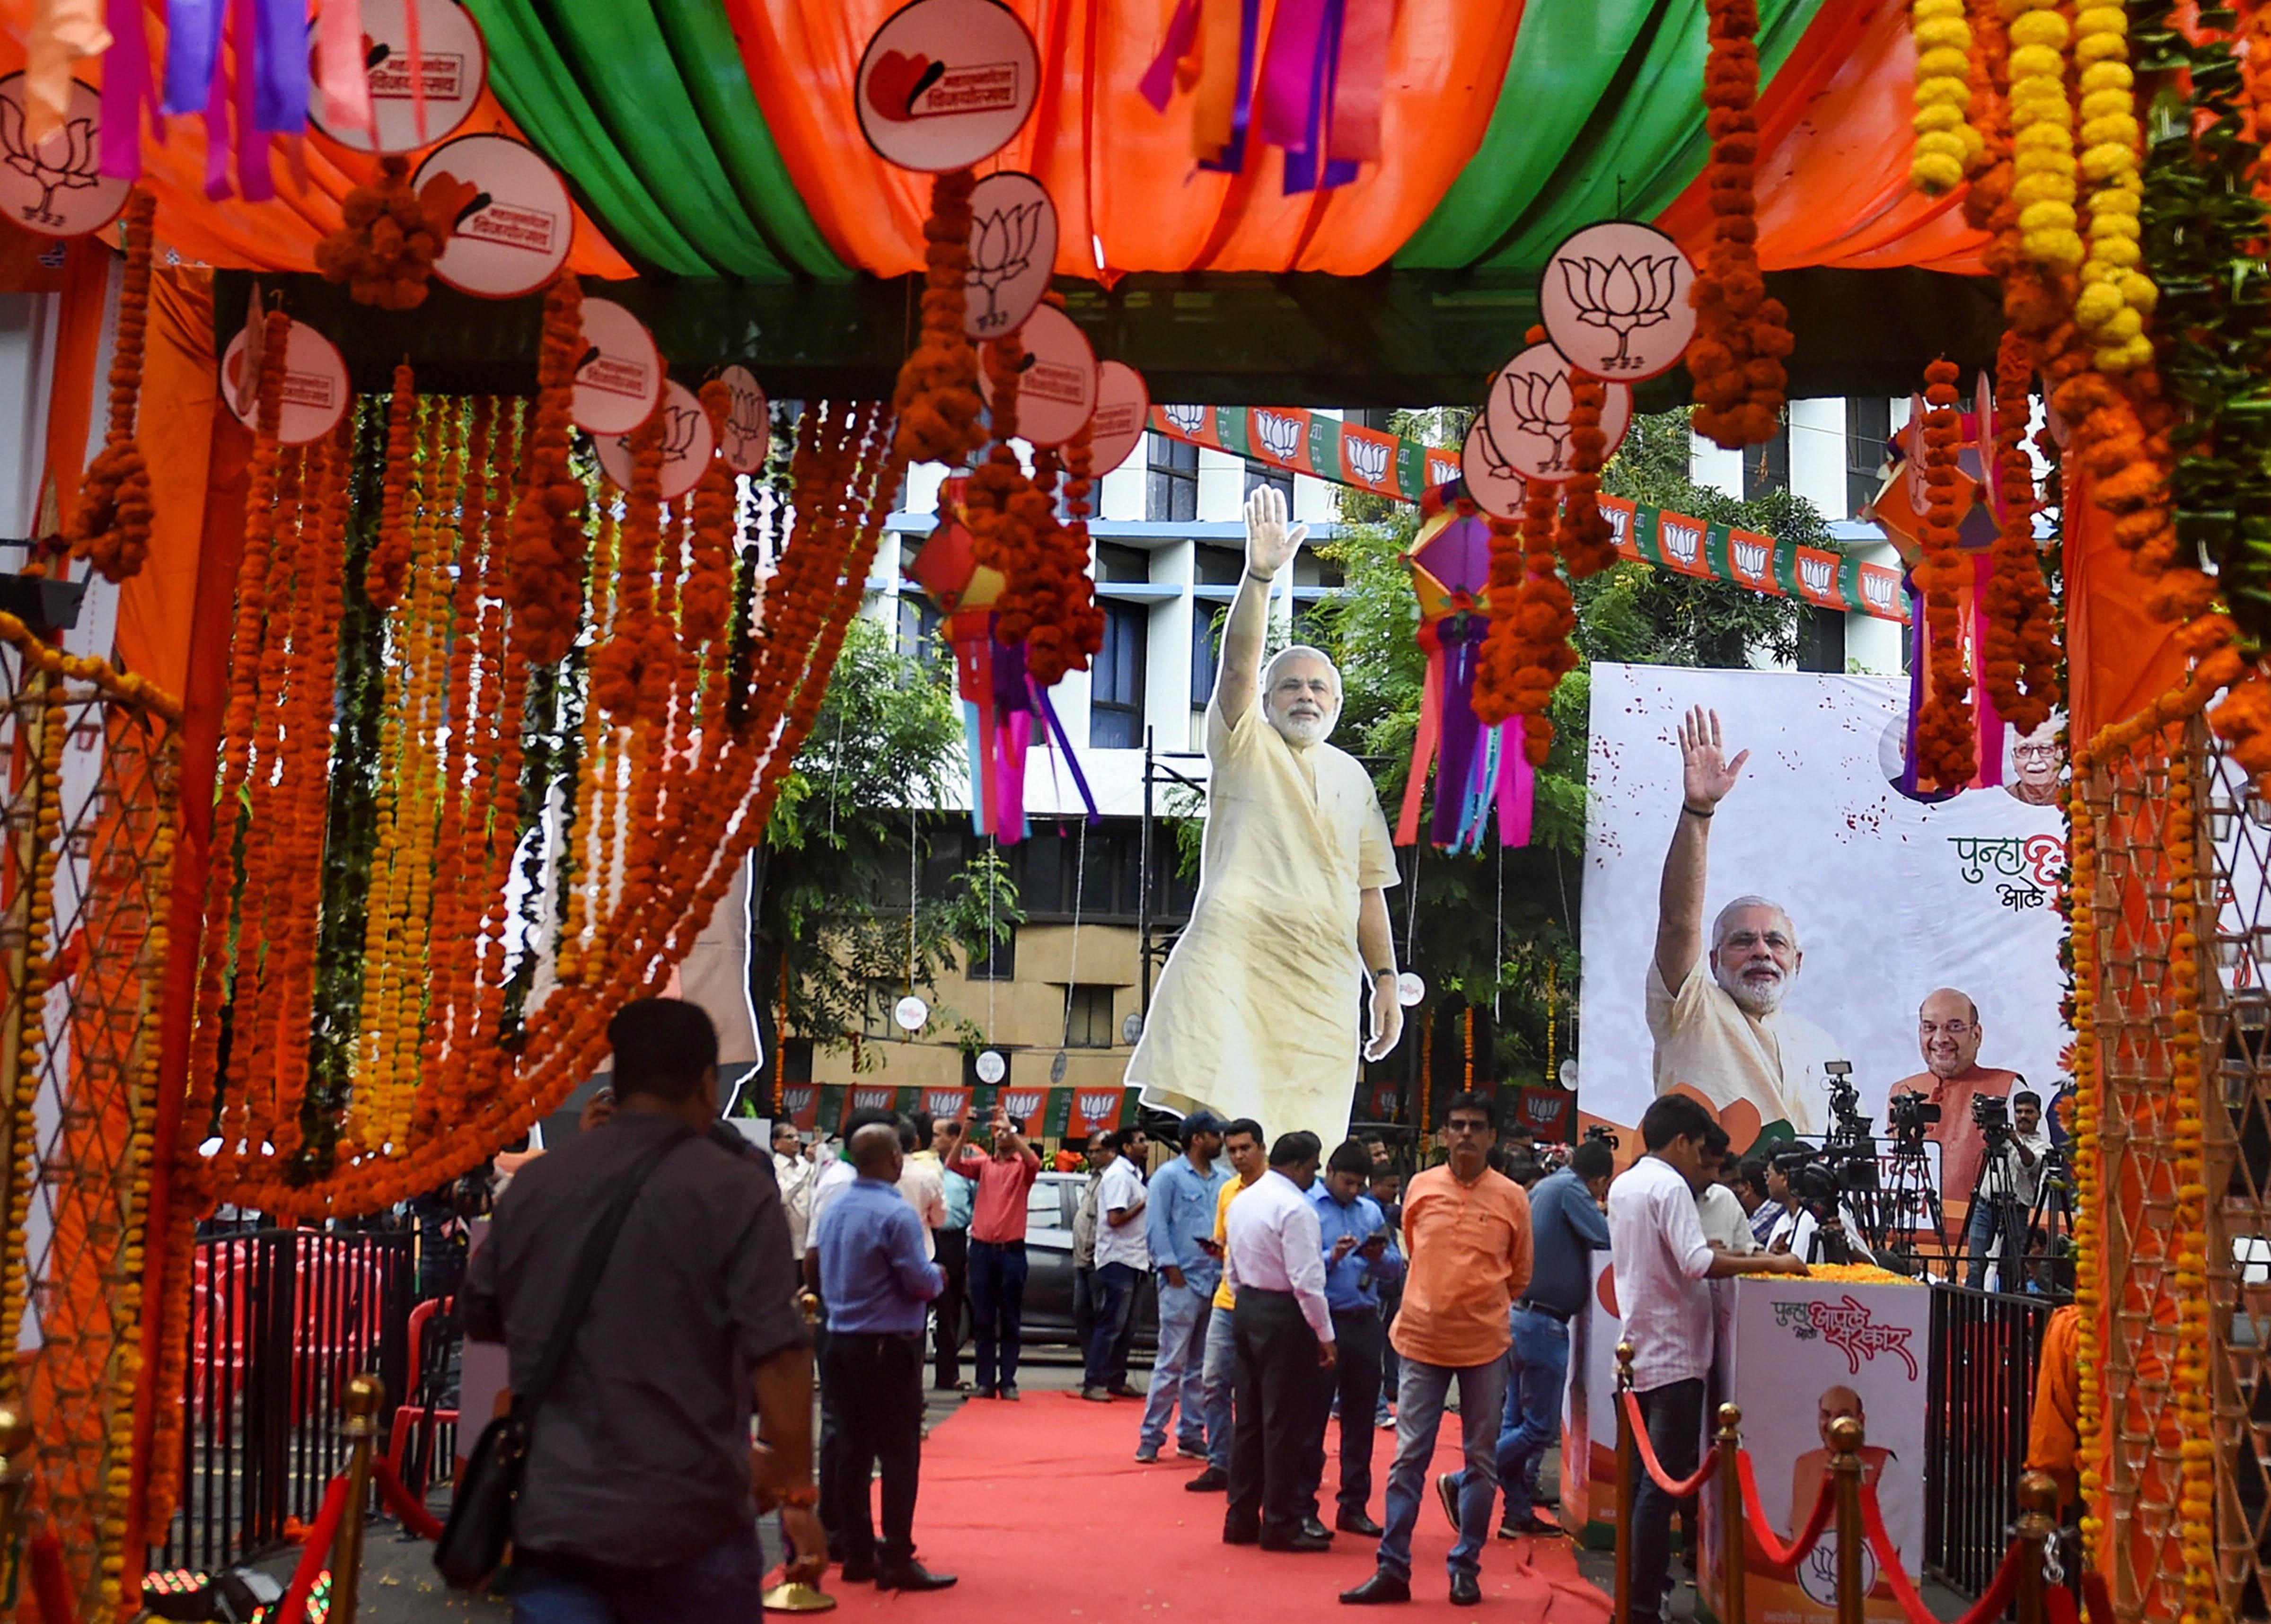 Preparations underway outside the BJP office as counting trends indicate the party's win in Maharashtra Assembly elections, in Mumbai, Thursday, October 24, 2019.